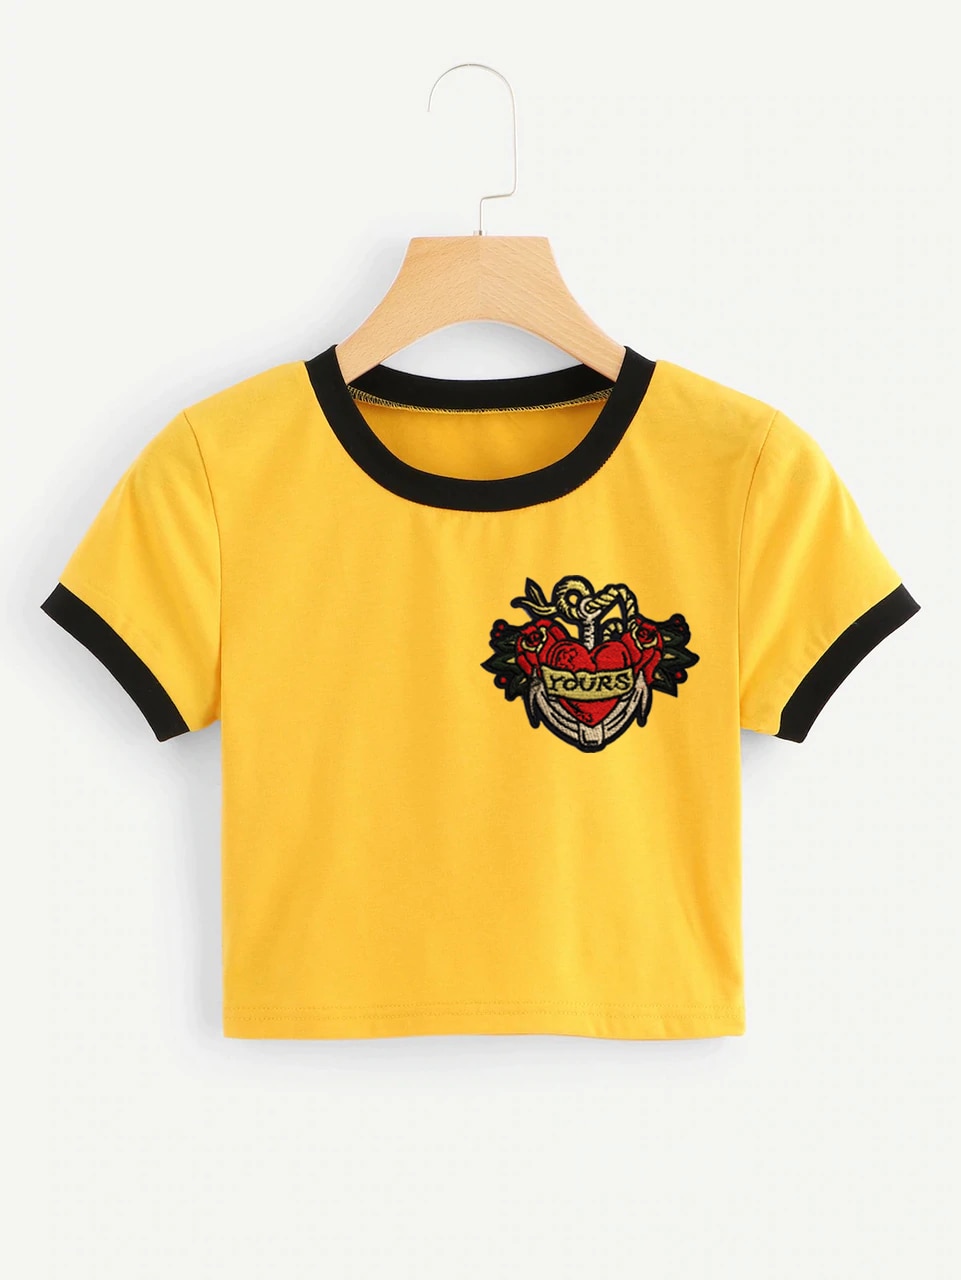 /2019/06/fifth-avenue-womens-sts57-ripzt31-embroidered-crop-ringer-t-shirt-yellow-and-black-image1.jpeg